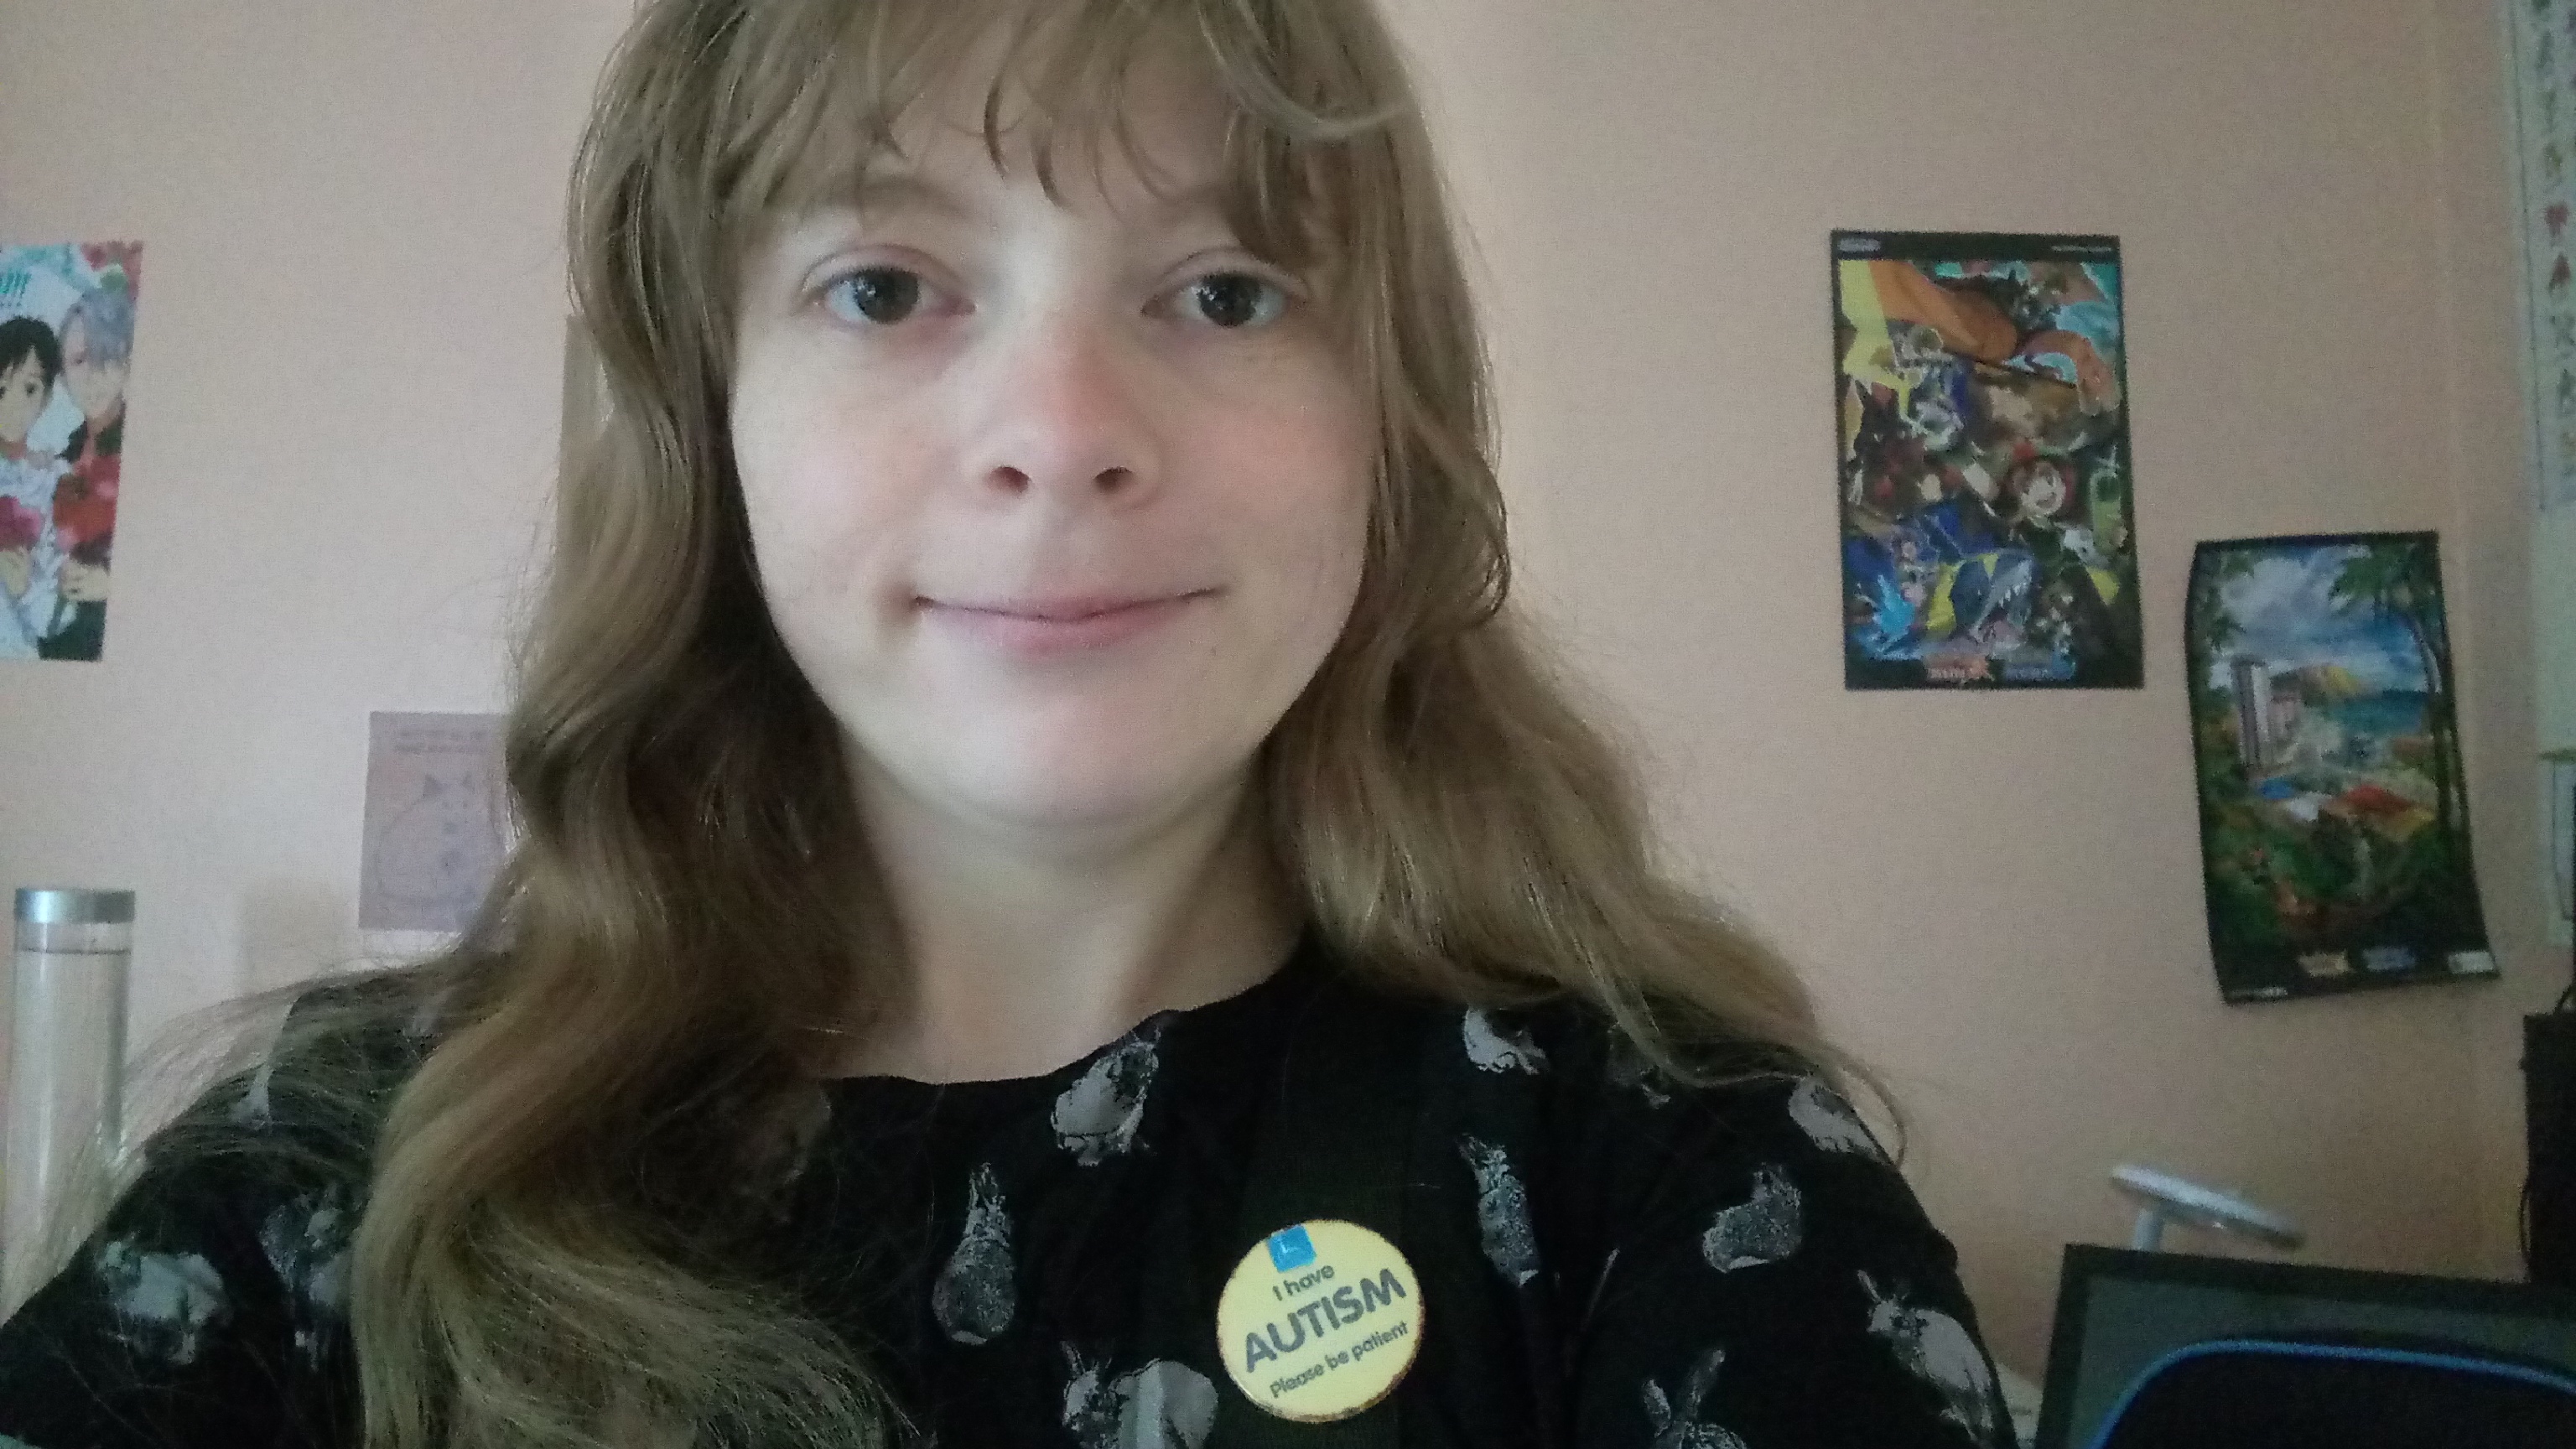 Lucy wearing her autism badge.